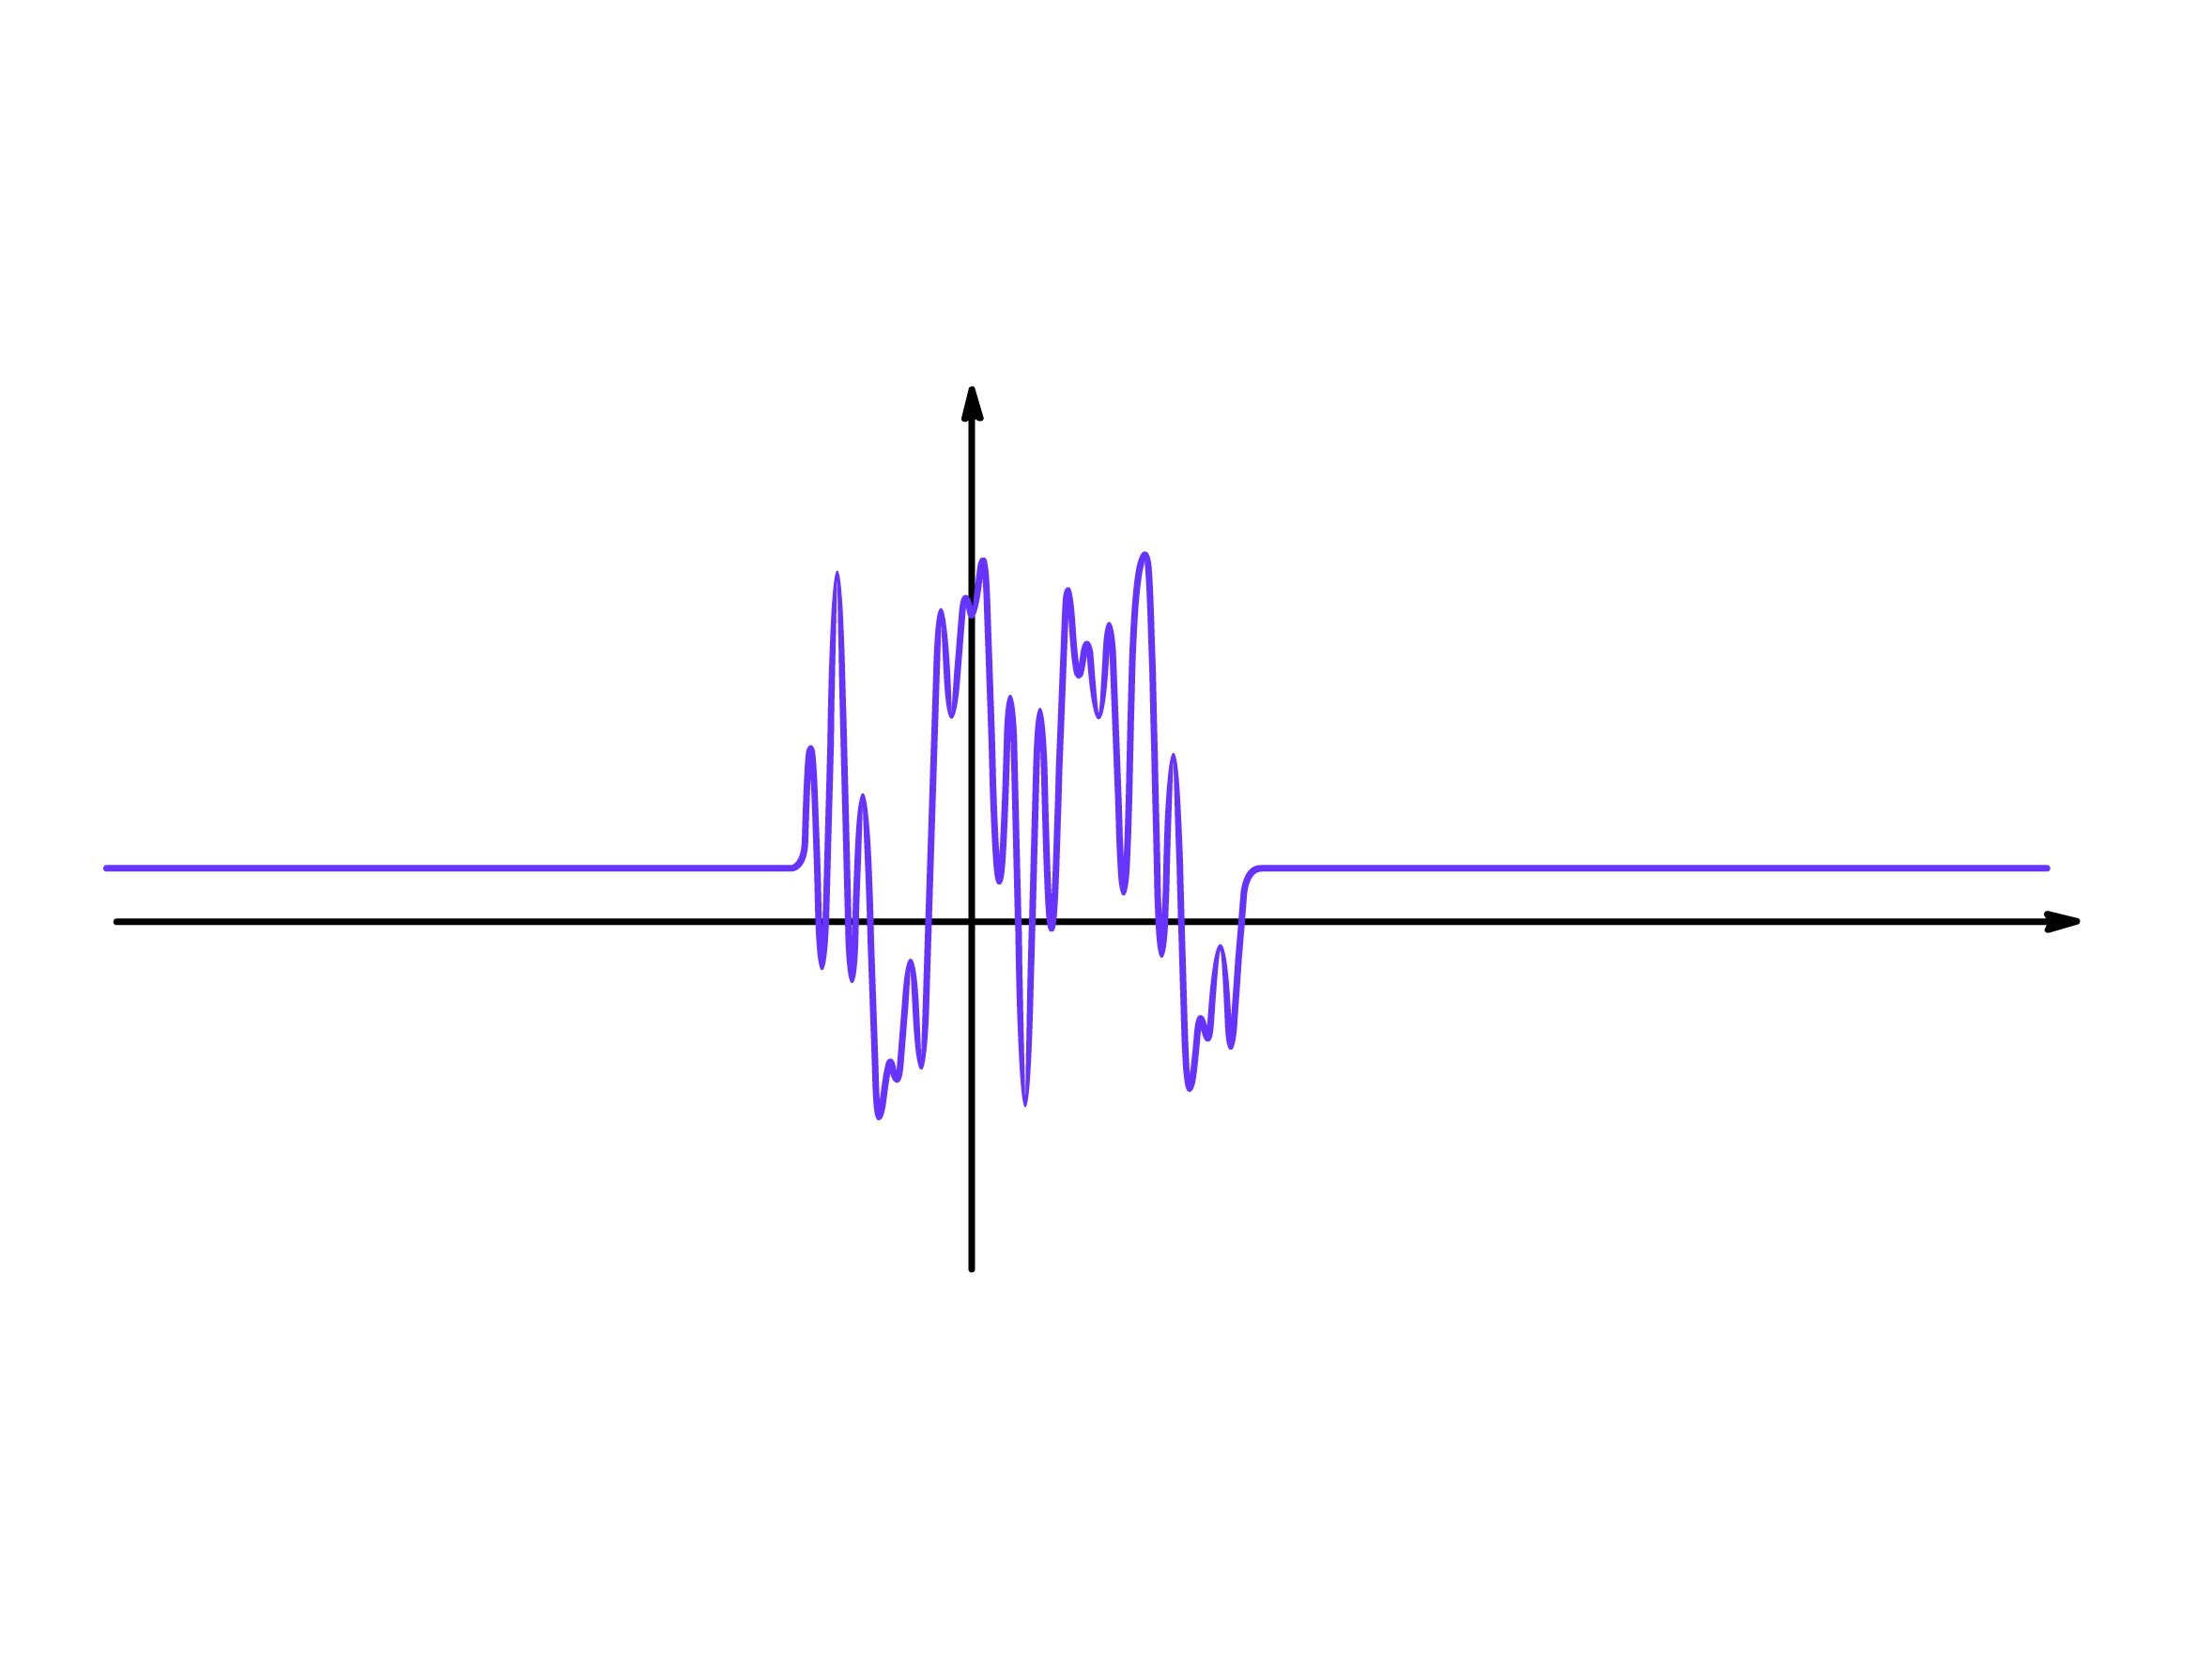 fourier_analysis_2.png